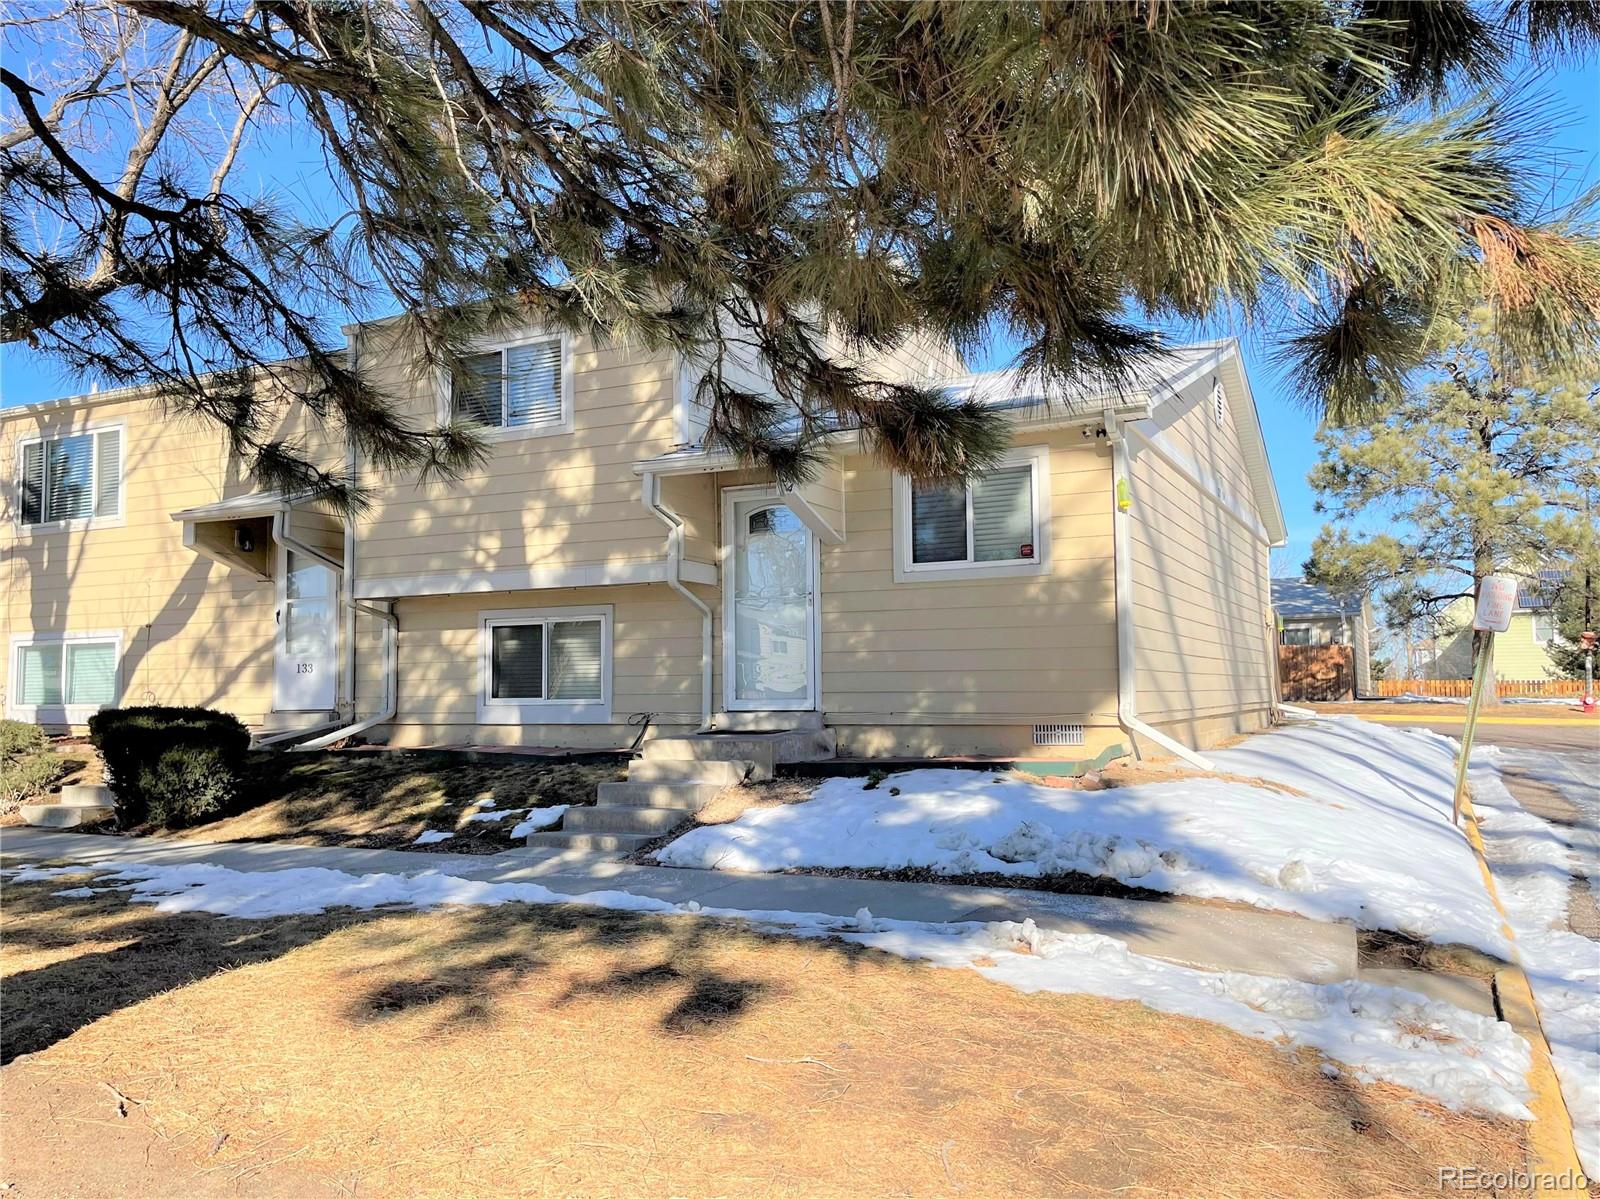 5731 92nd, Westminster, CO